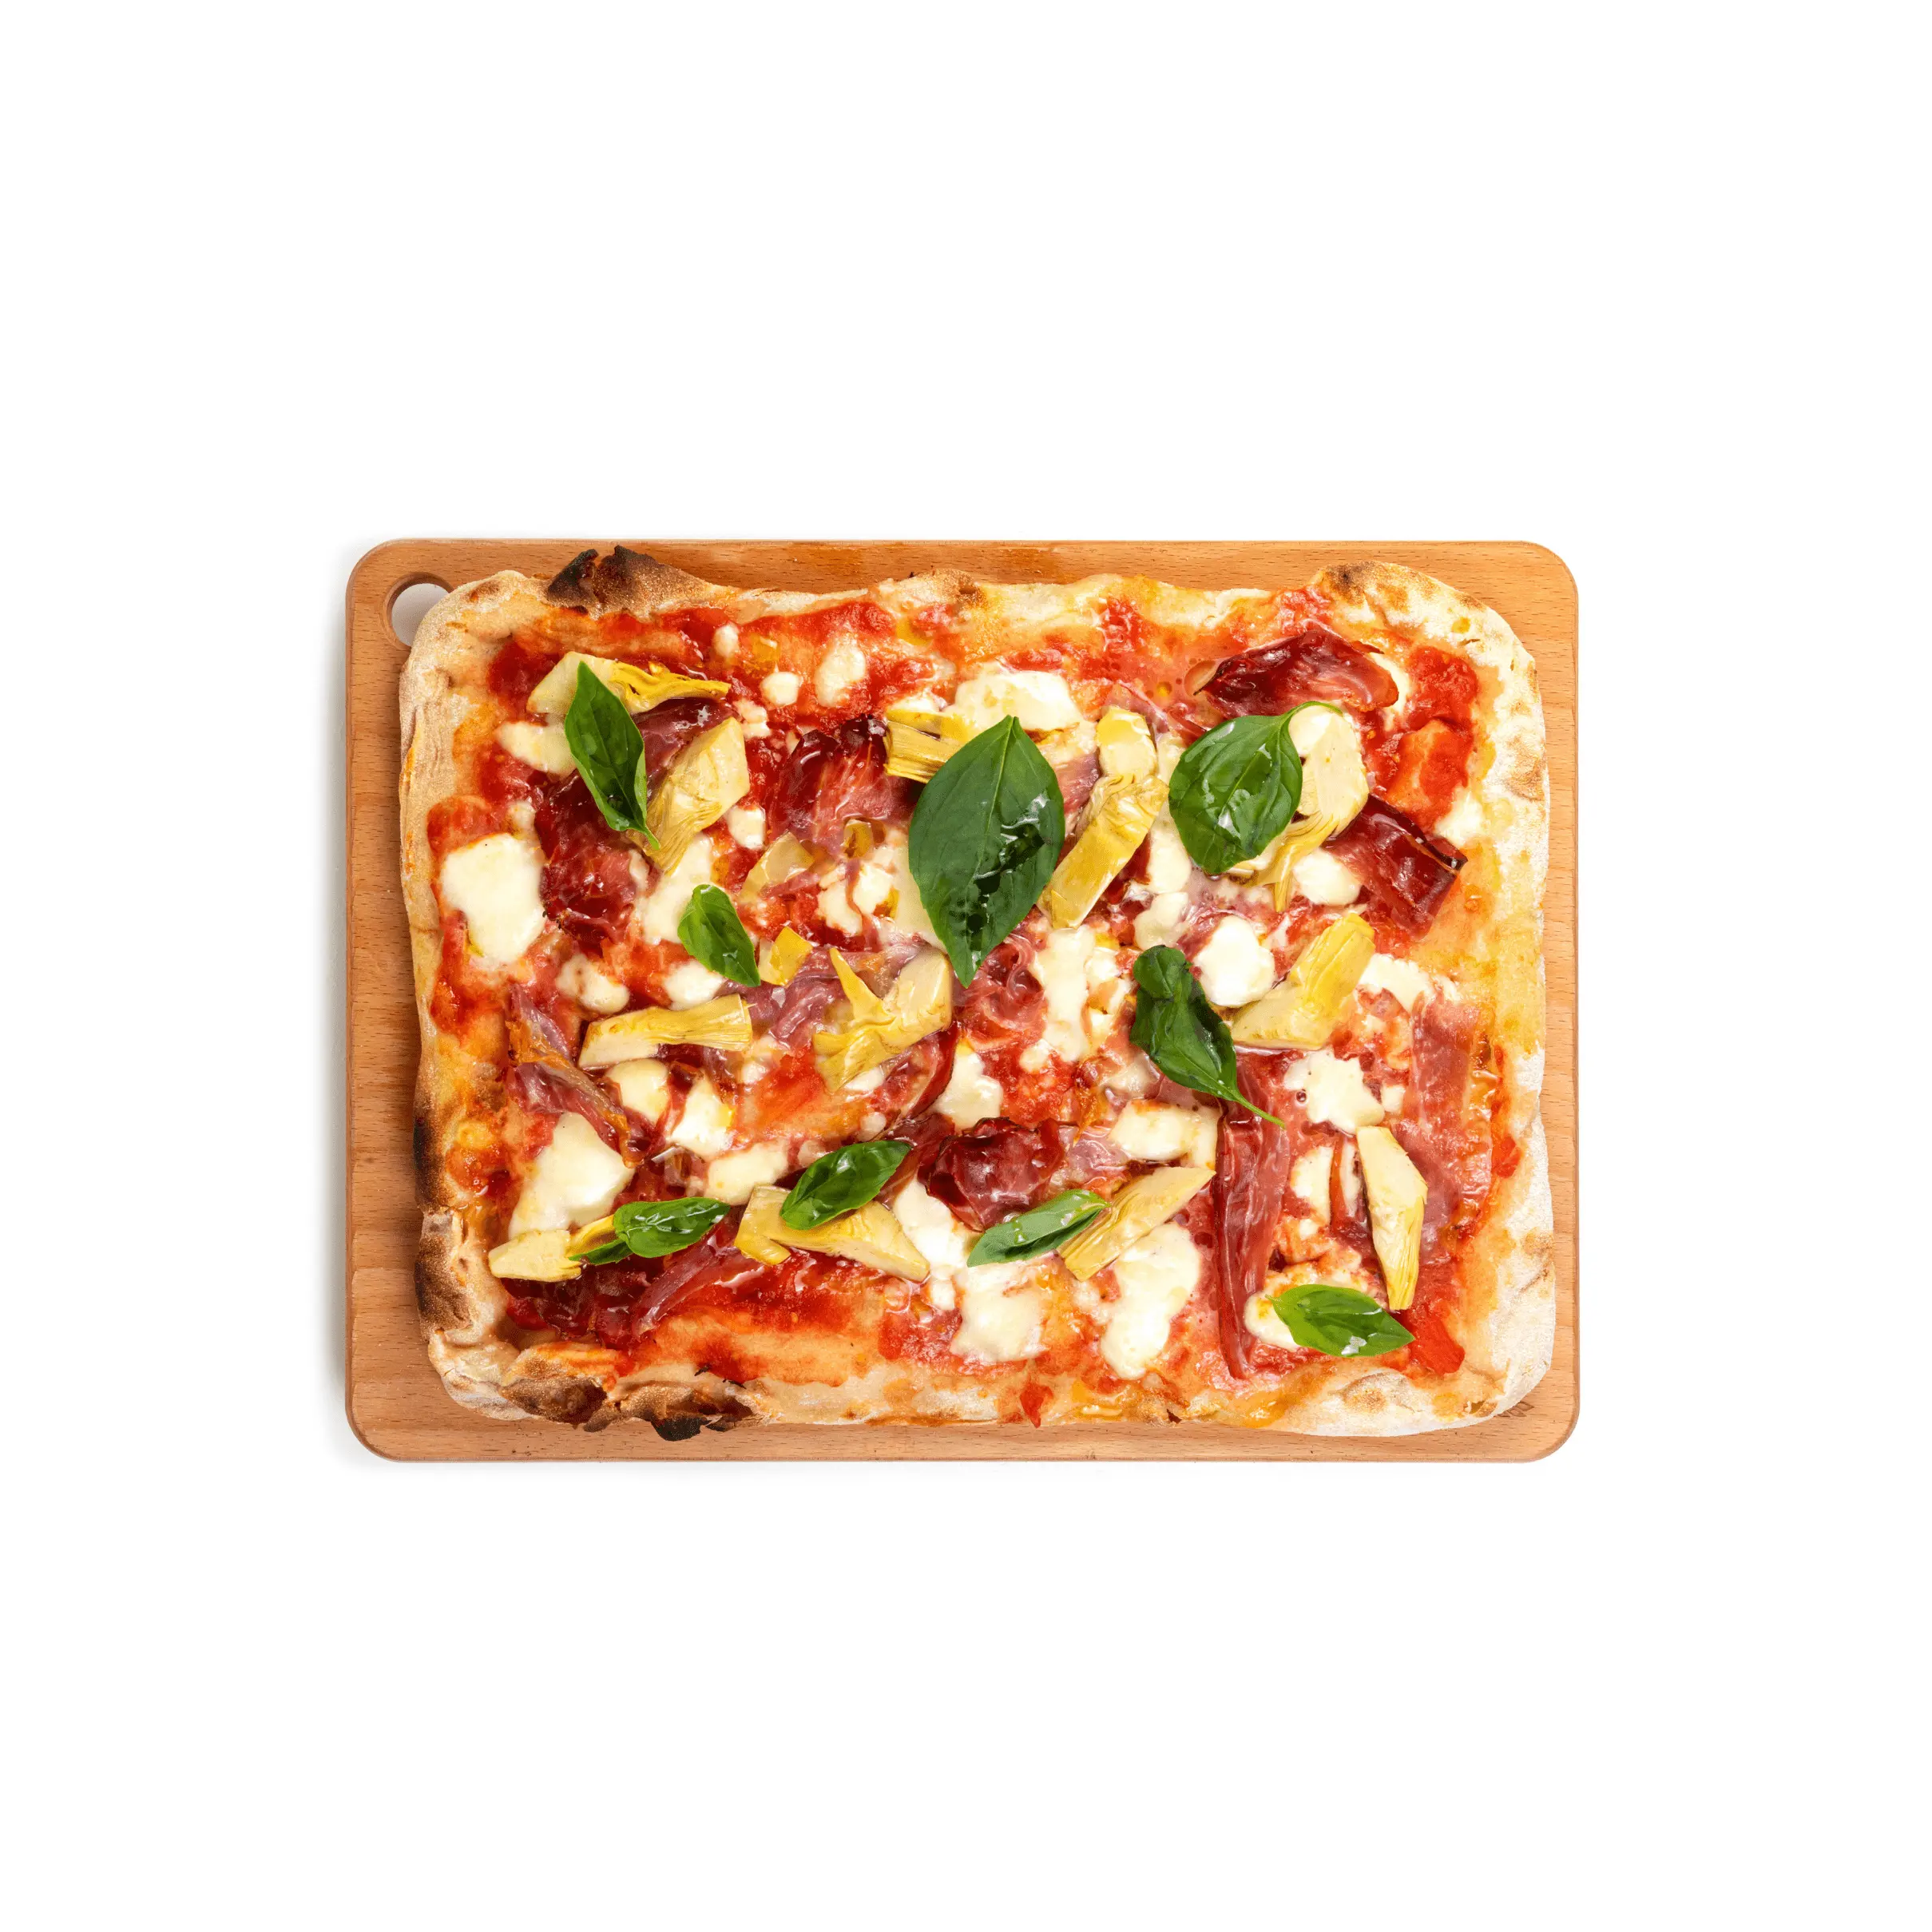 Precooked half tray baked pizza base 30x40 cm 650 gr high quality Italian food product to be garnished and baked in the oven